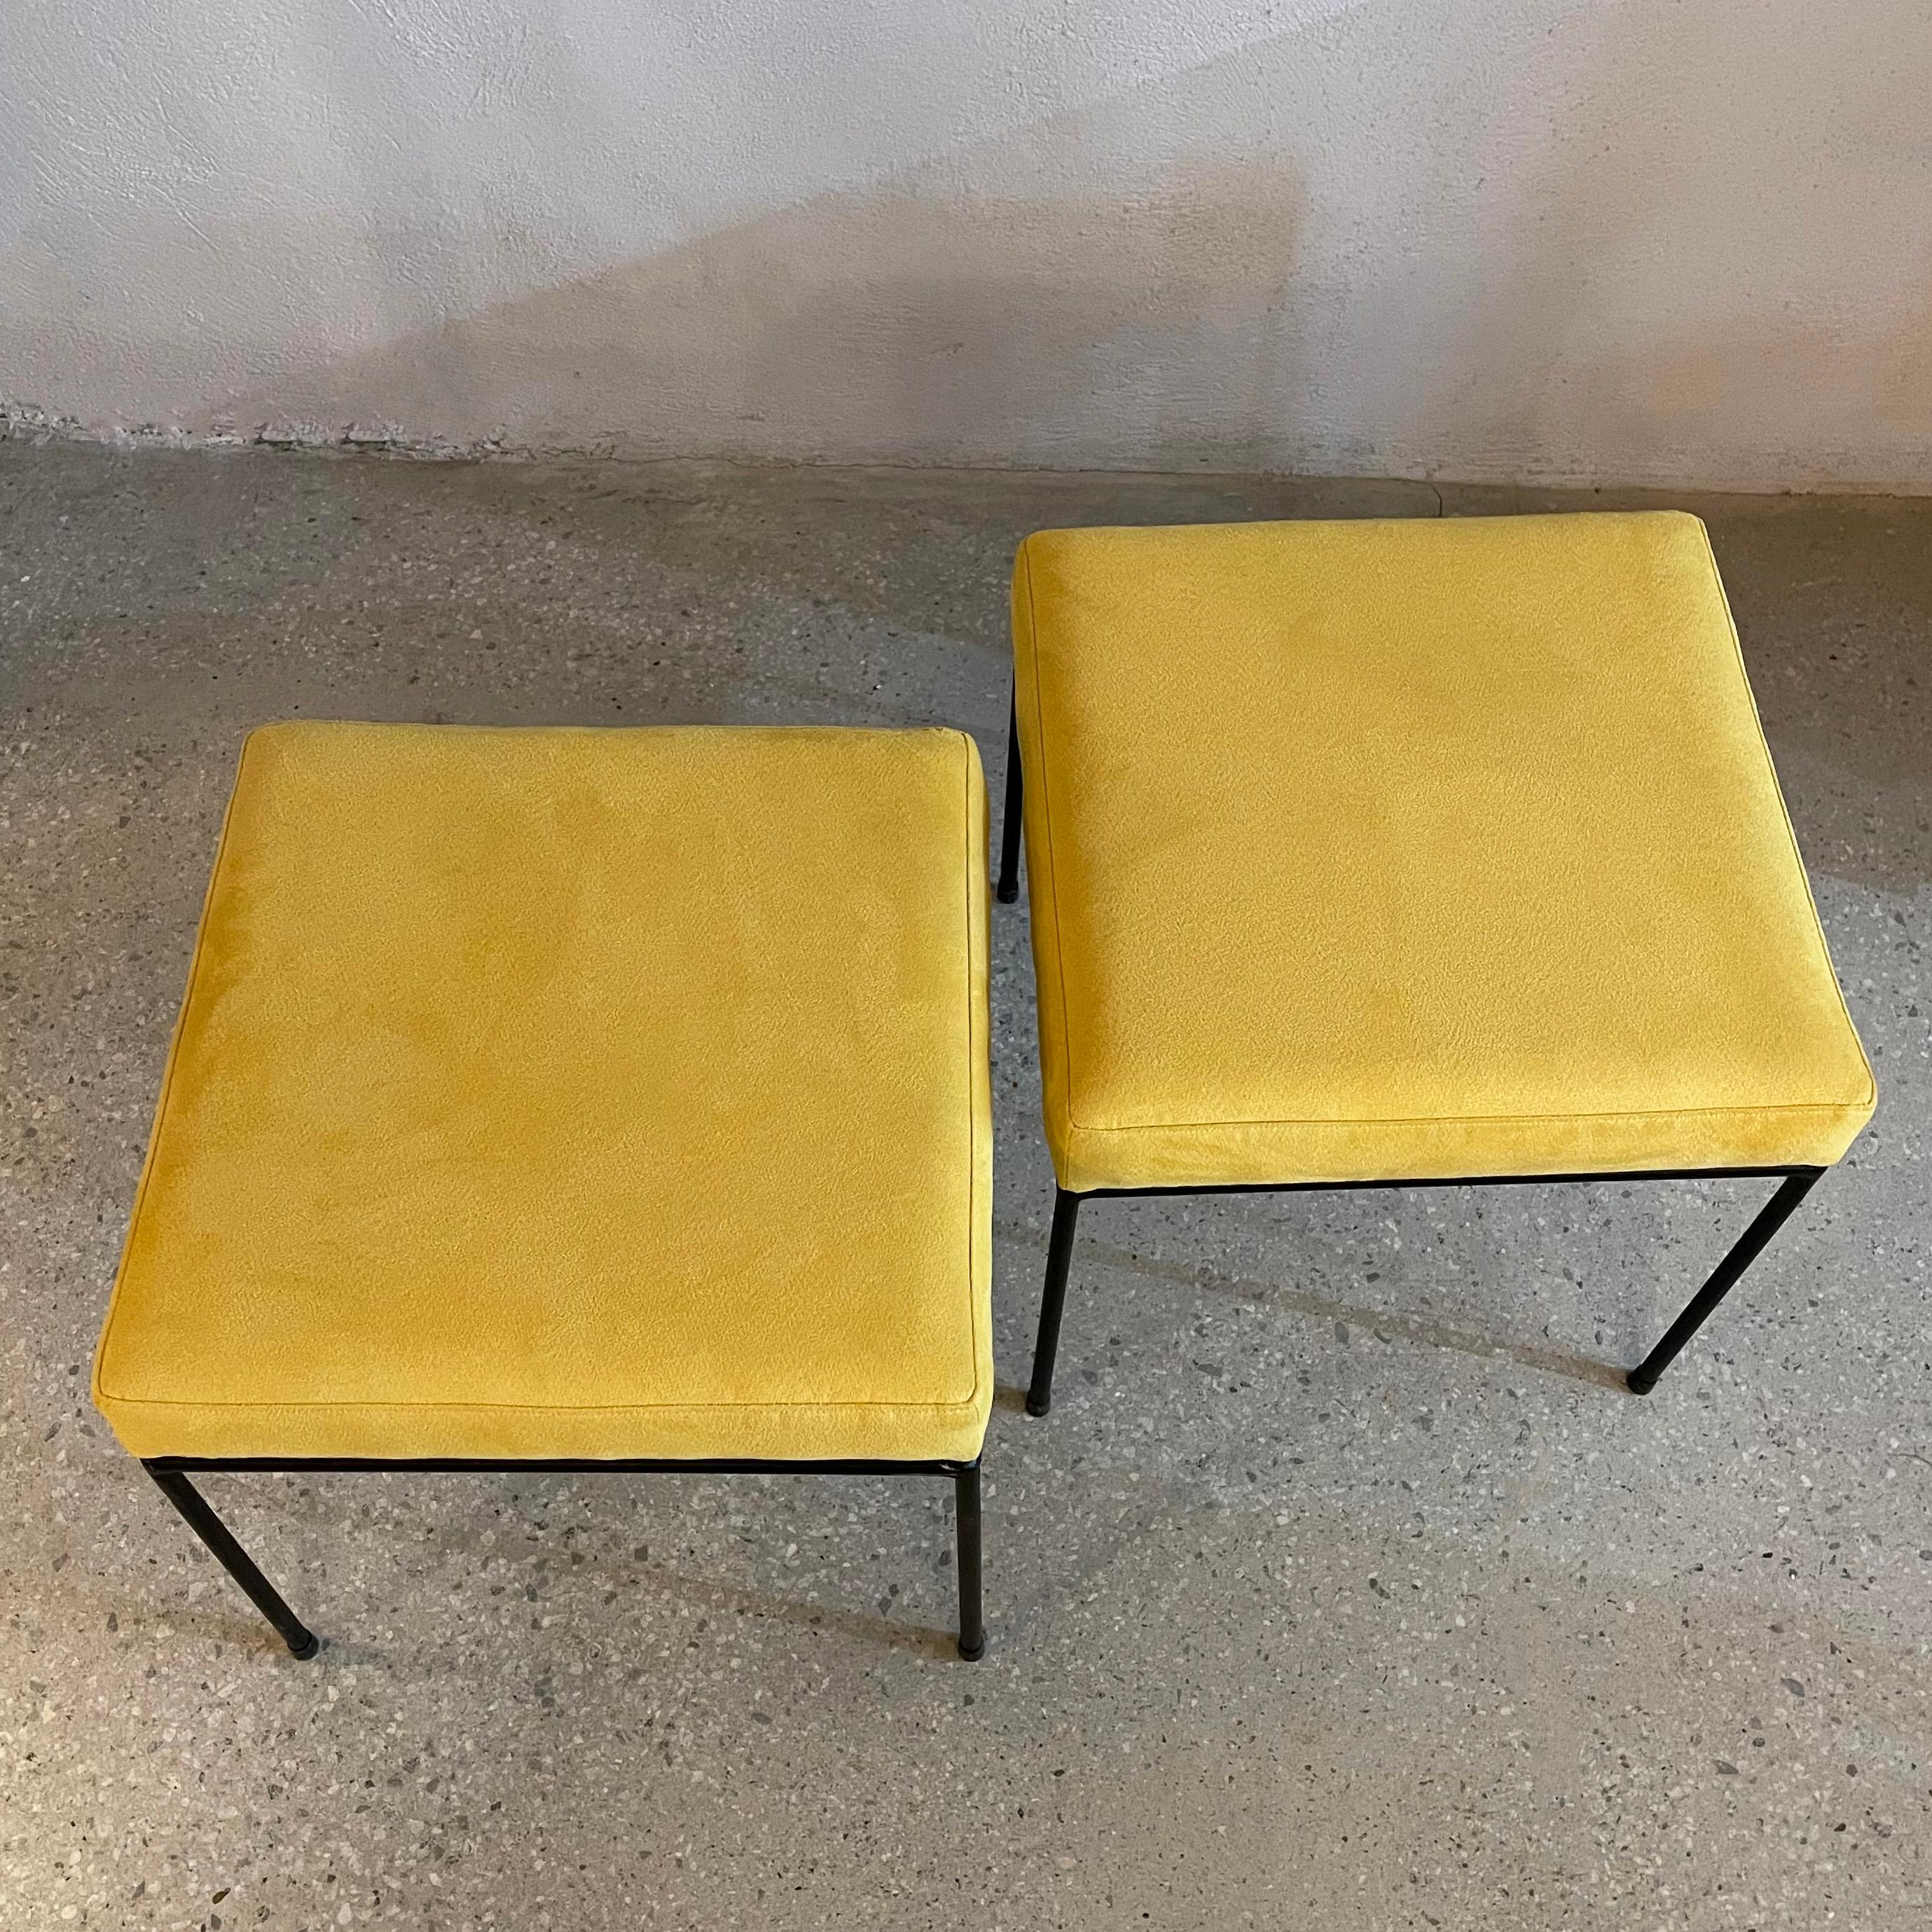 Minimal Mid-Century Modern Wrought Iron And Ultrasuede Ottomans 3